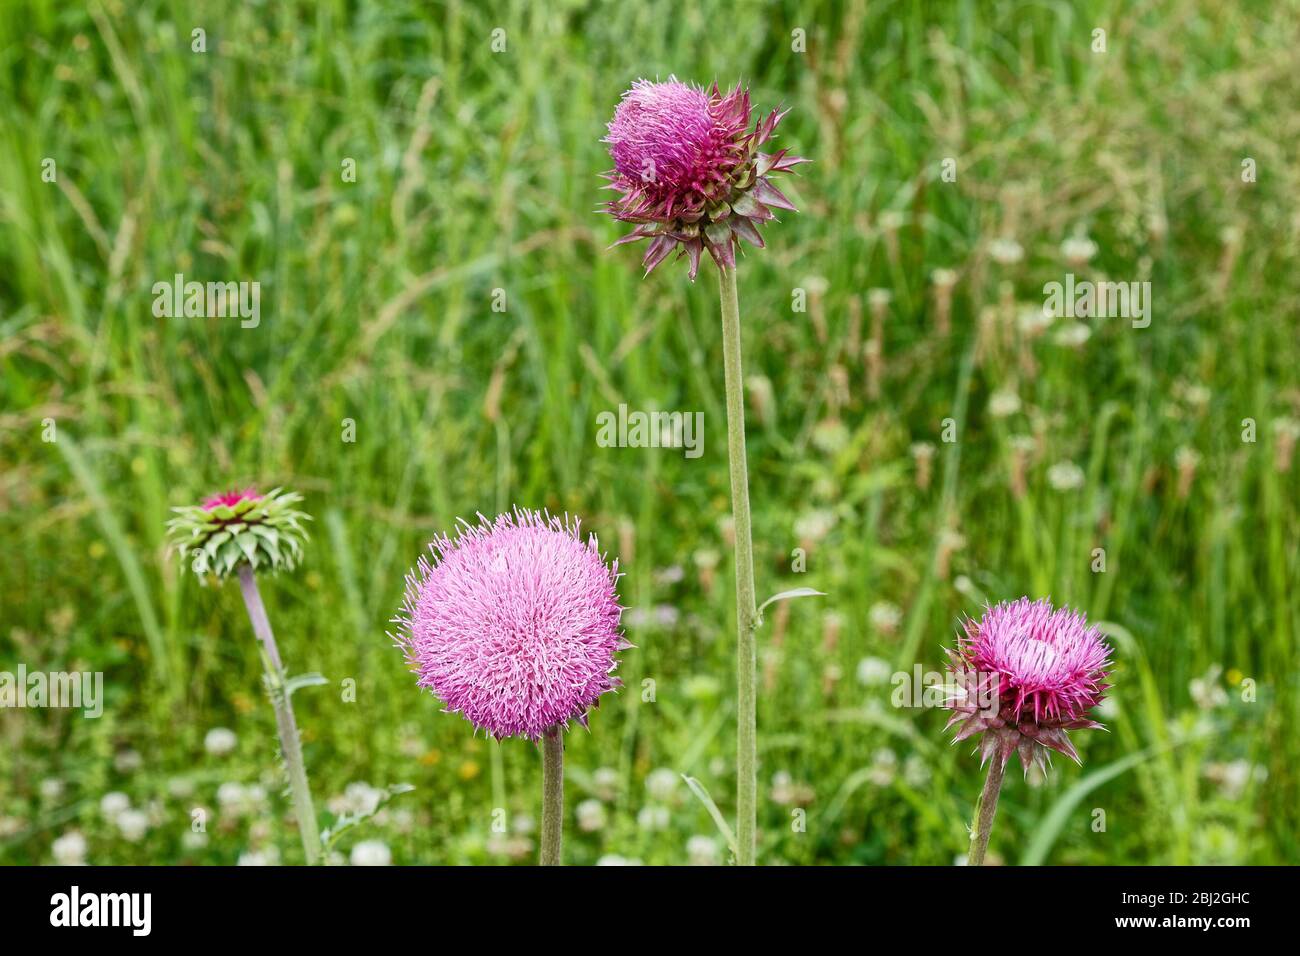 lavender wildflower, ball shape, Nodding Thistle, Musk Thistle, Bristle Thistle, Cardus nutans, invasive weed, noxious, nature, different stages, KY, Stock Photo